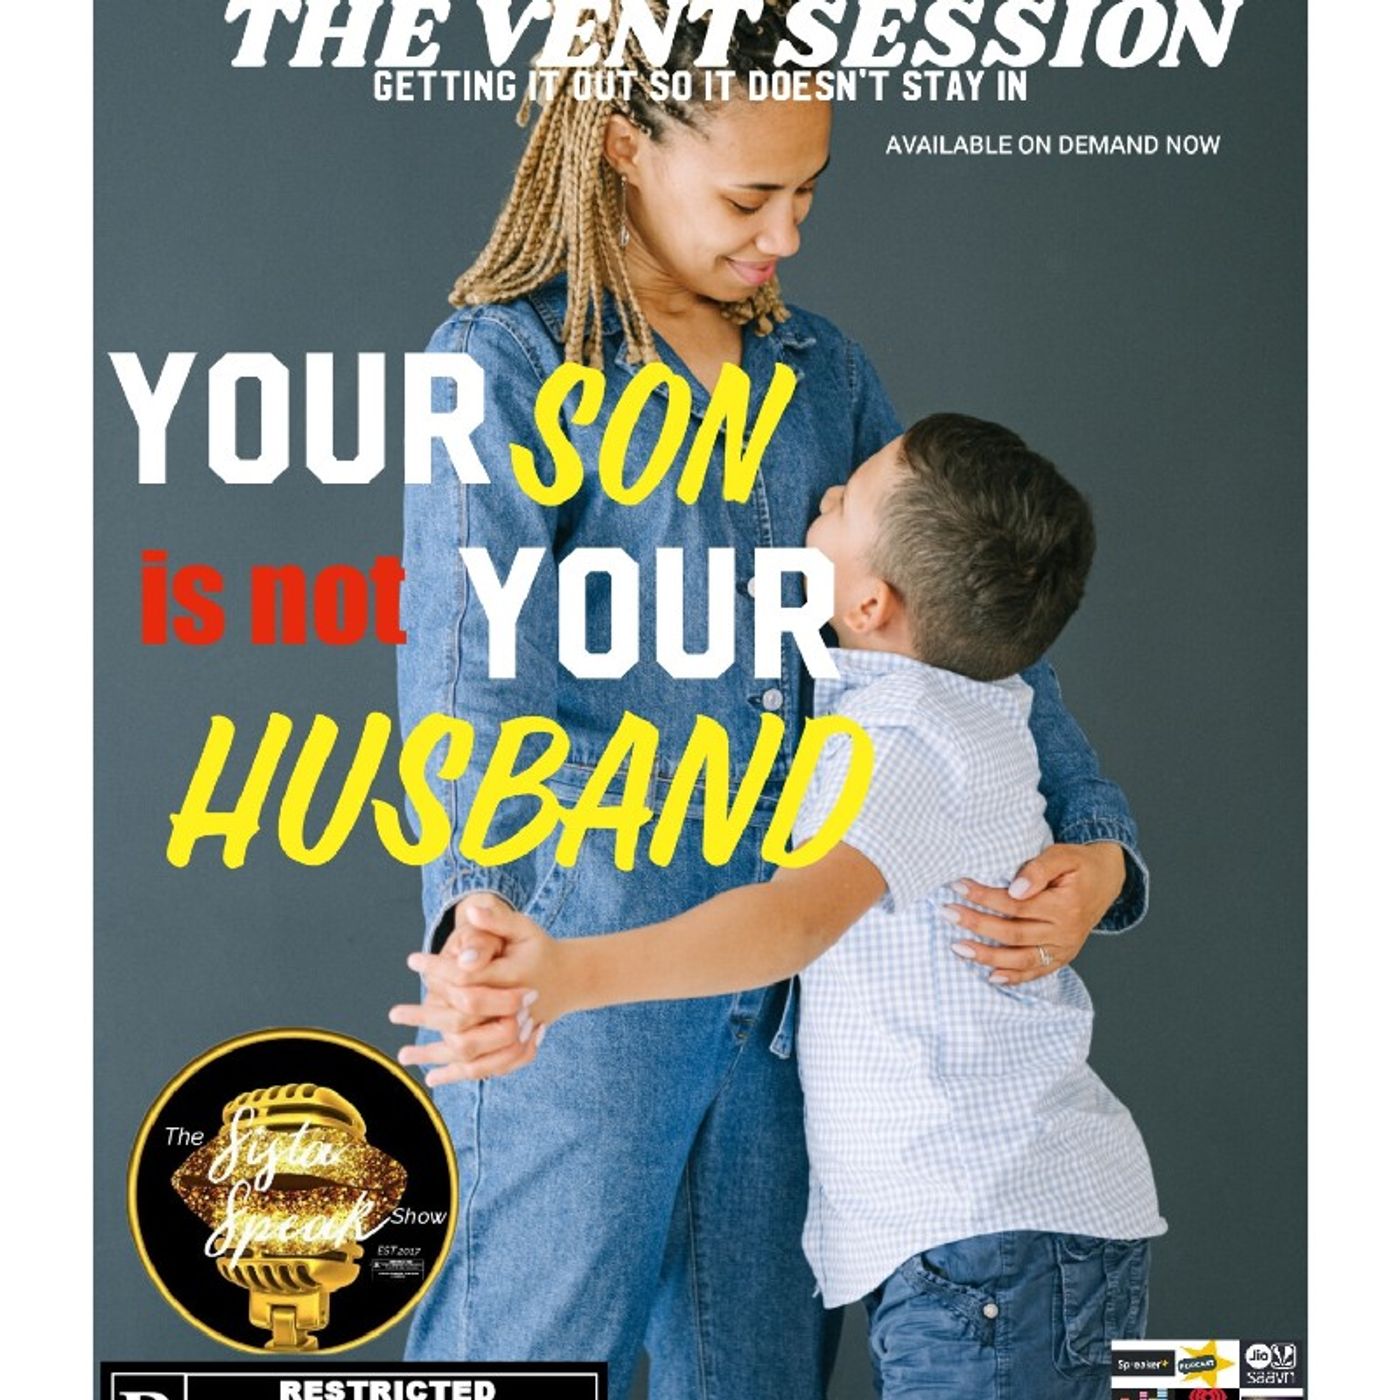 Episode 238 - The Vent Session - Your Son Is Not Your Husband